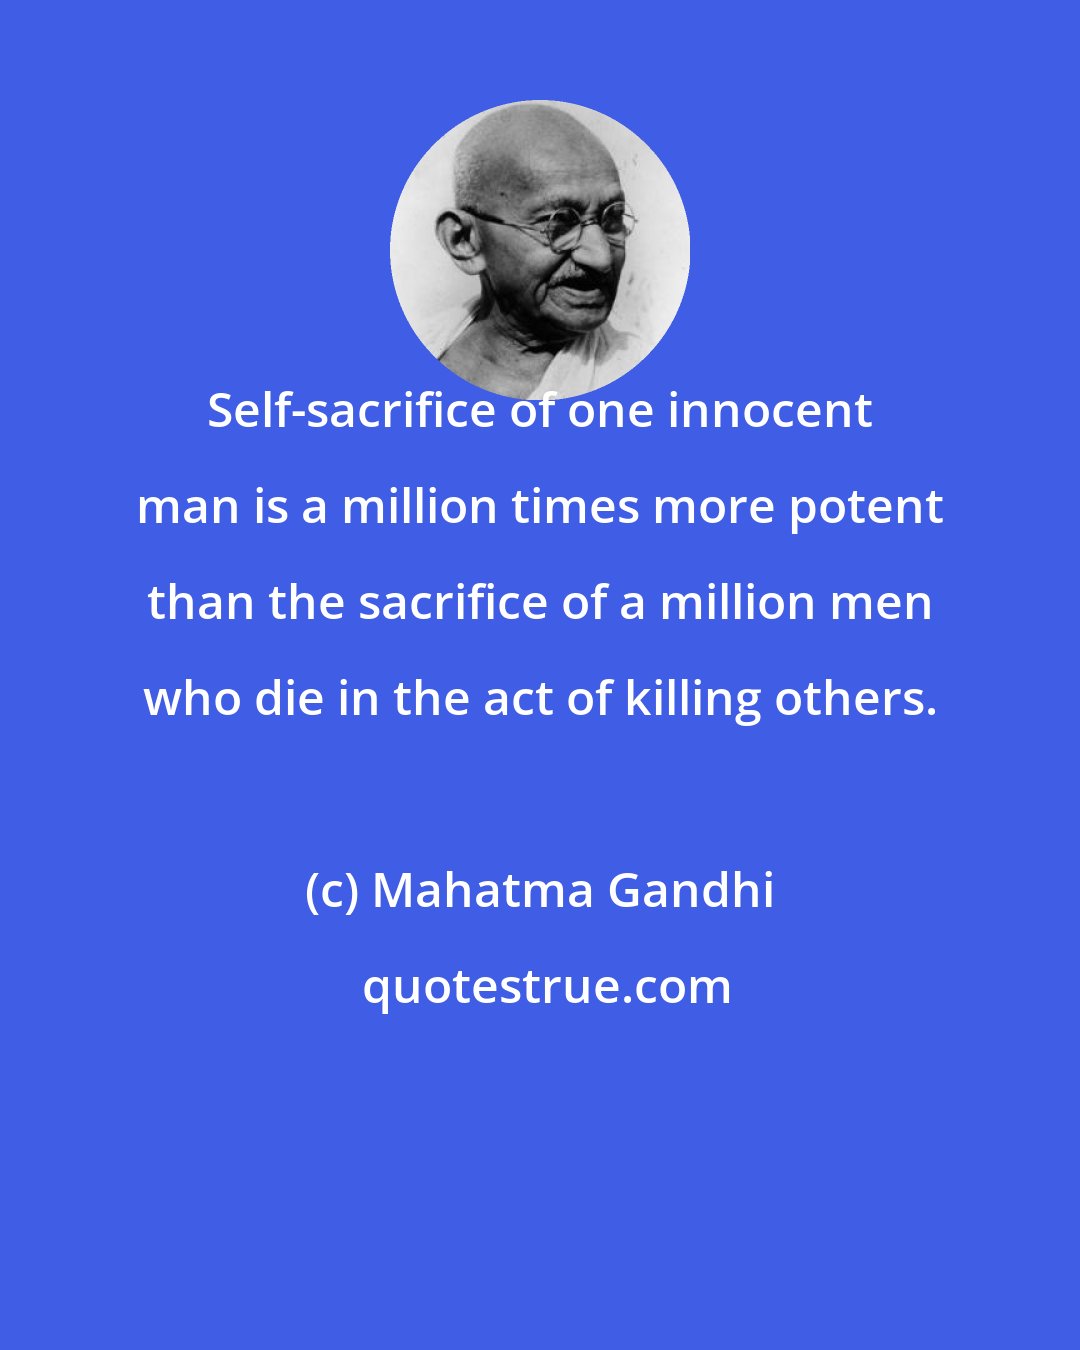 Mahatma Gandhi: Self-sacrifice of one innocent man is a million times more potent than the sacrifice of a million men who die in the act of killing others.